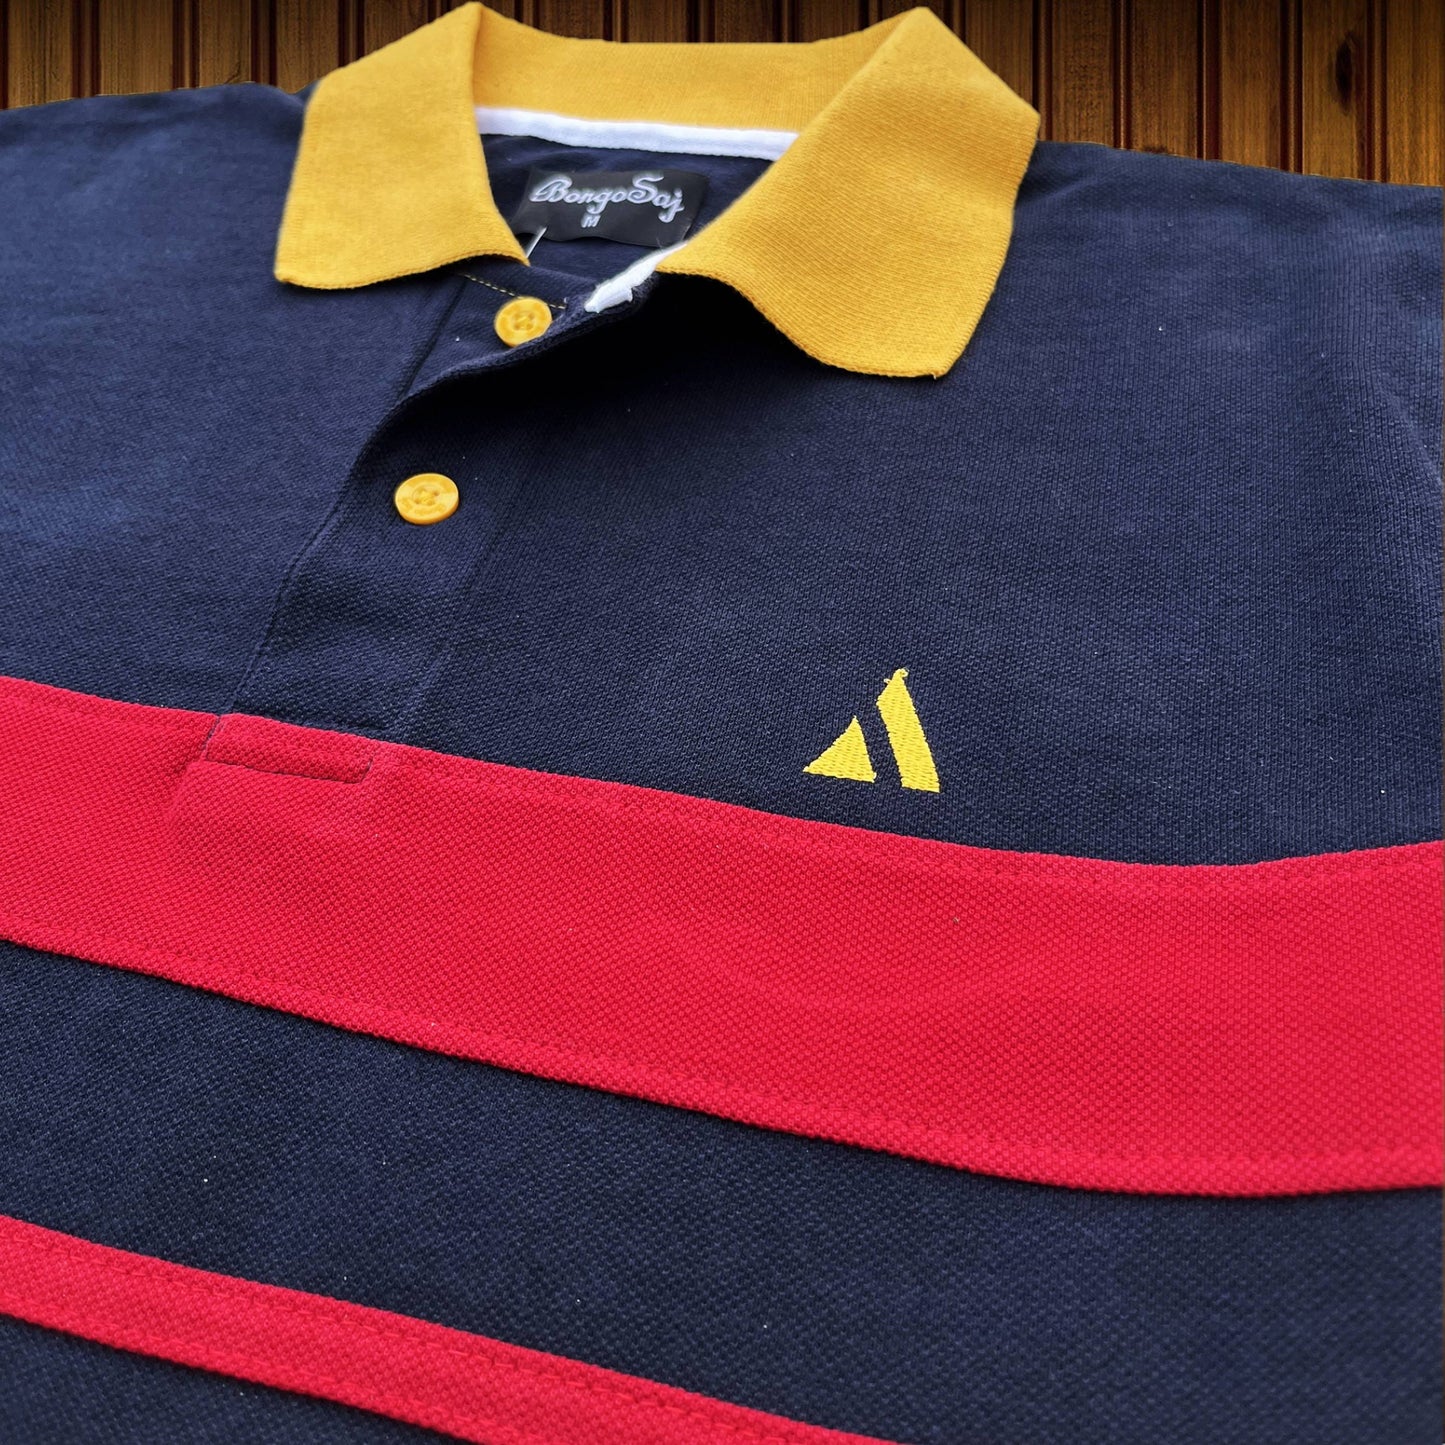 Men stylish T Shirt Navy Blue , Red with Golden Yellow, Red stripe